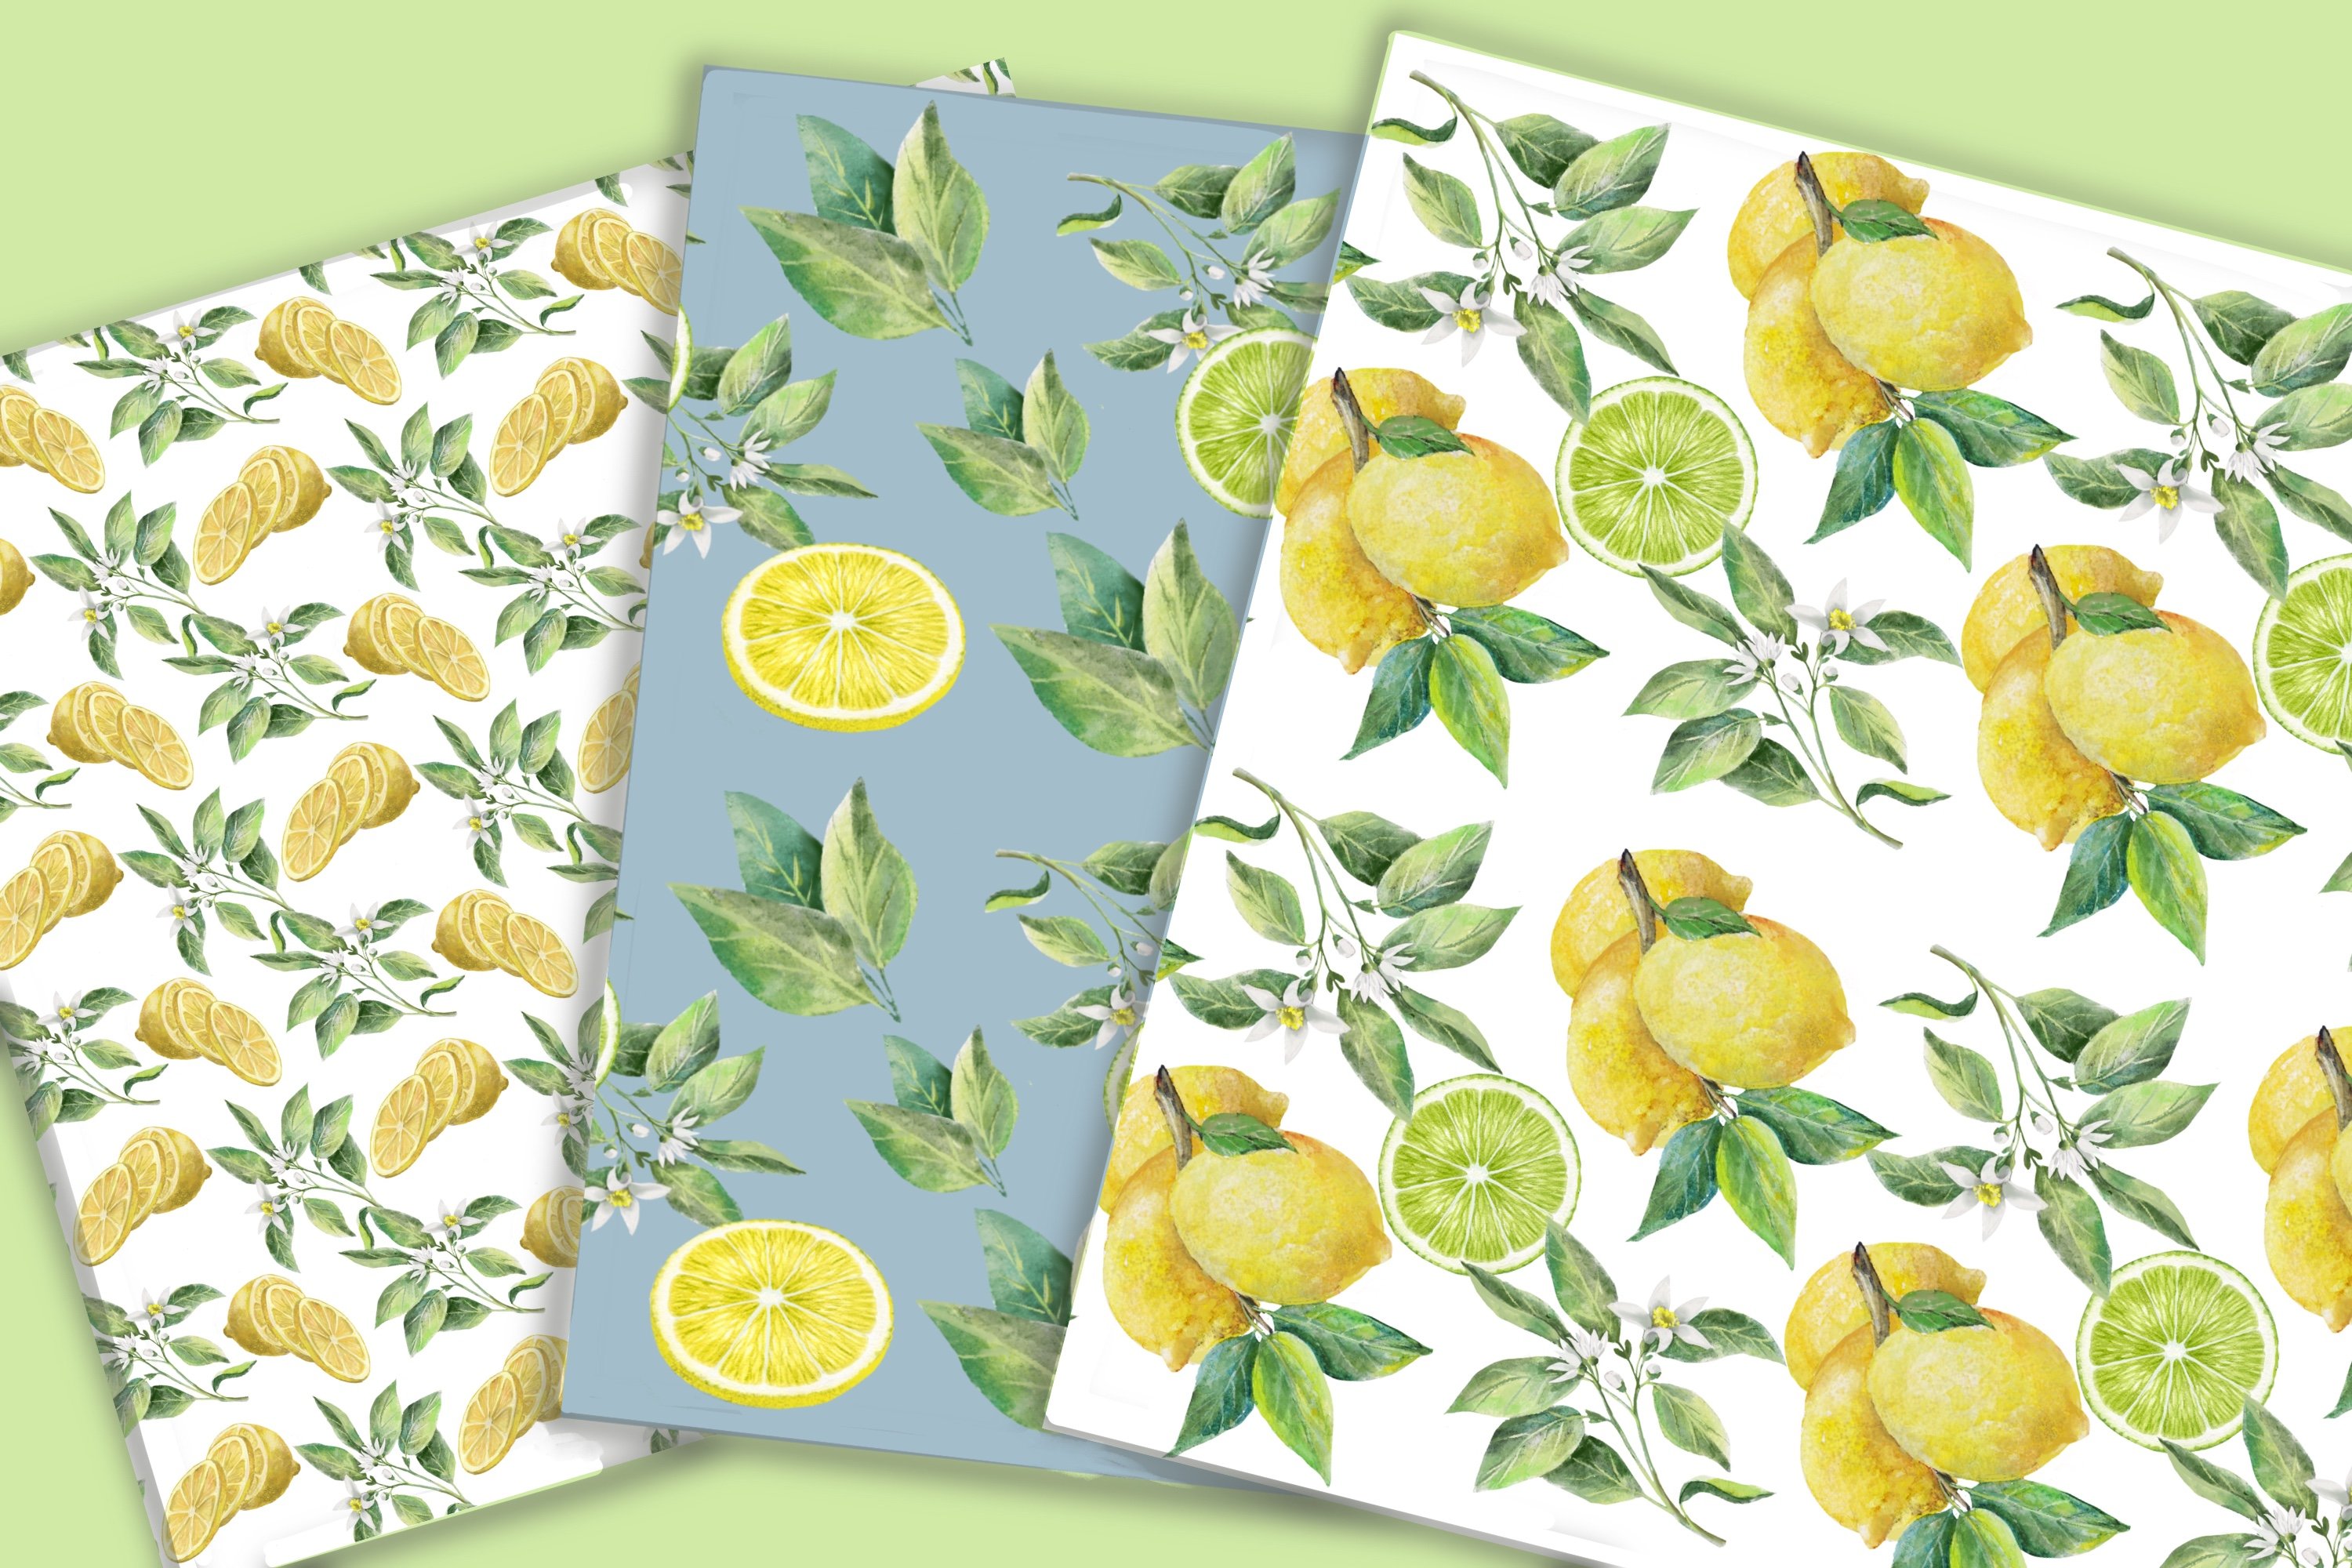 Use this lemon patterns for the different textures.